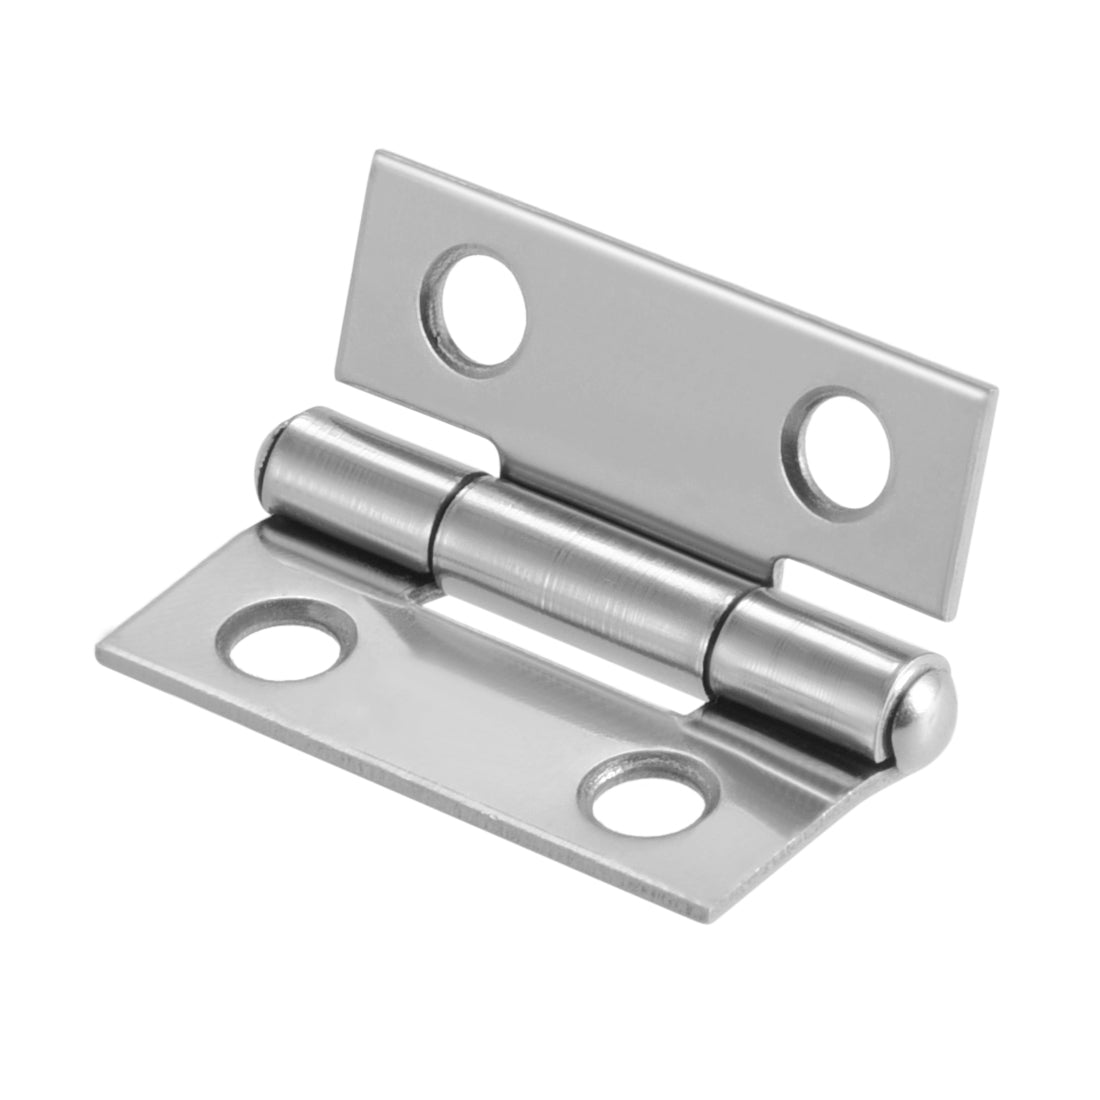 uxcell Uxcell 0.98" Hinge Silver Door Cabinet Hinges Fittings Brushed Chrome Plain 4 pcs